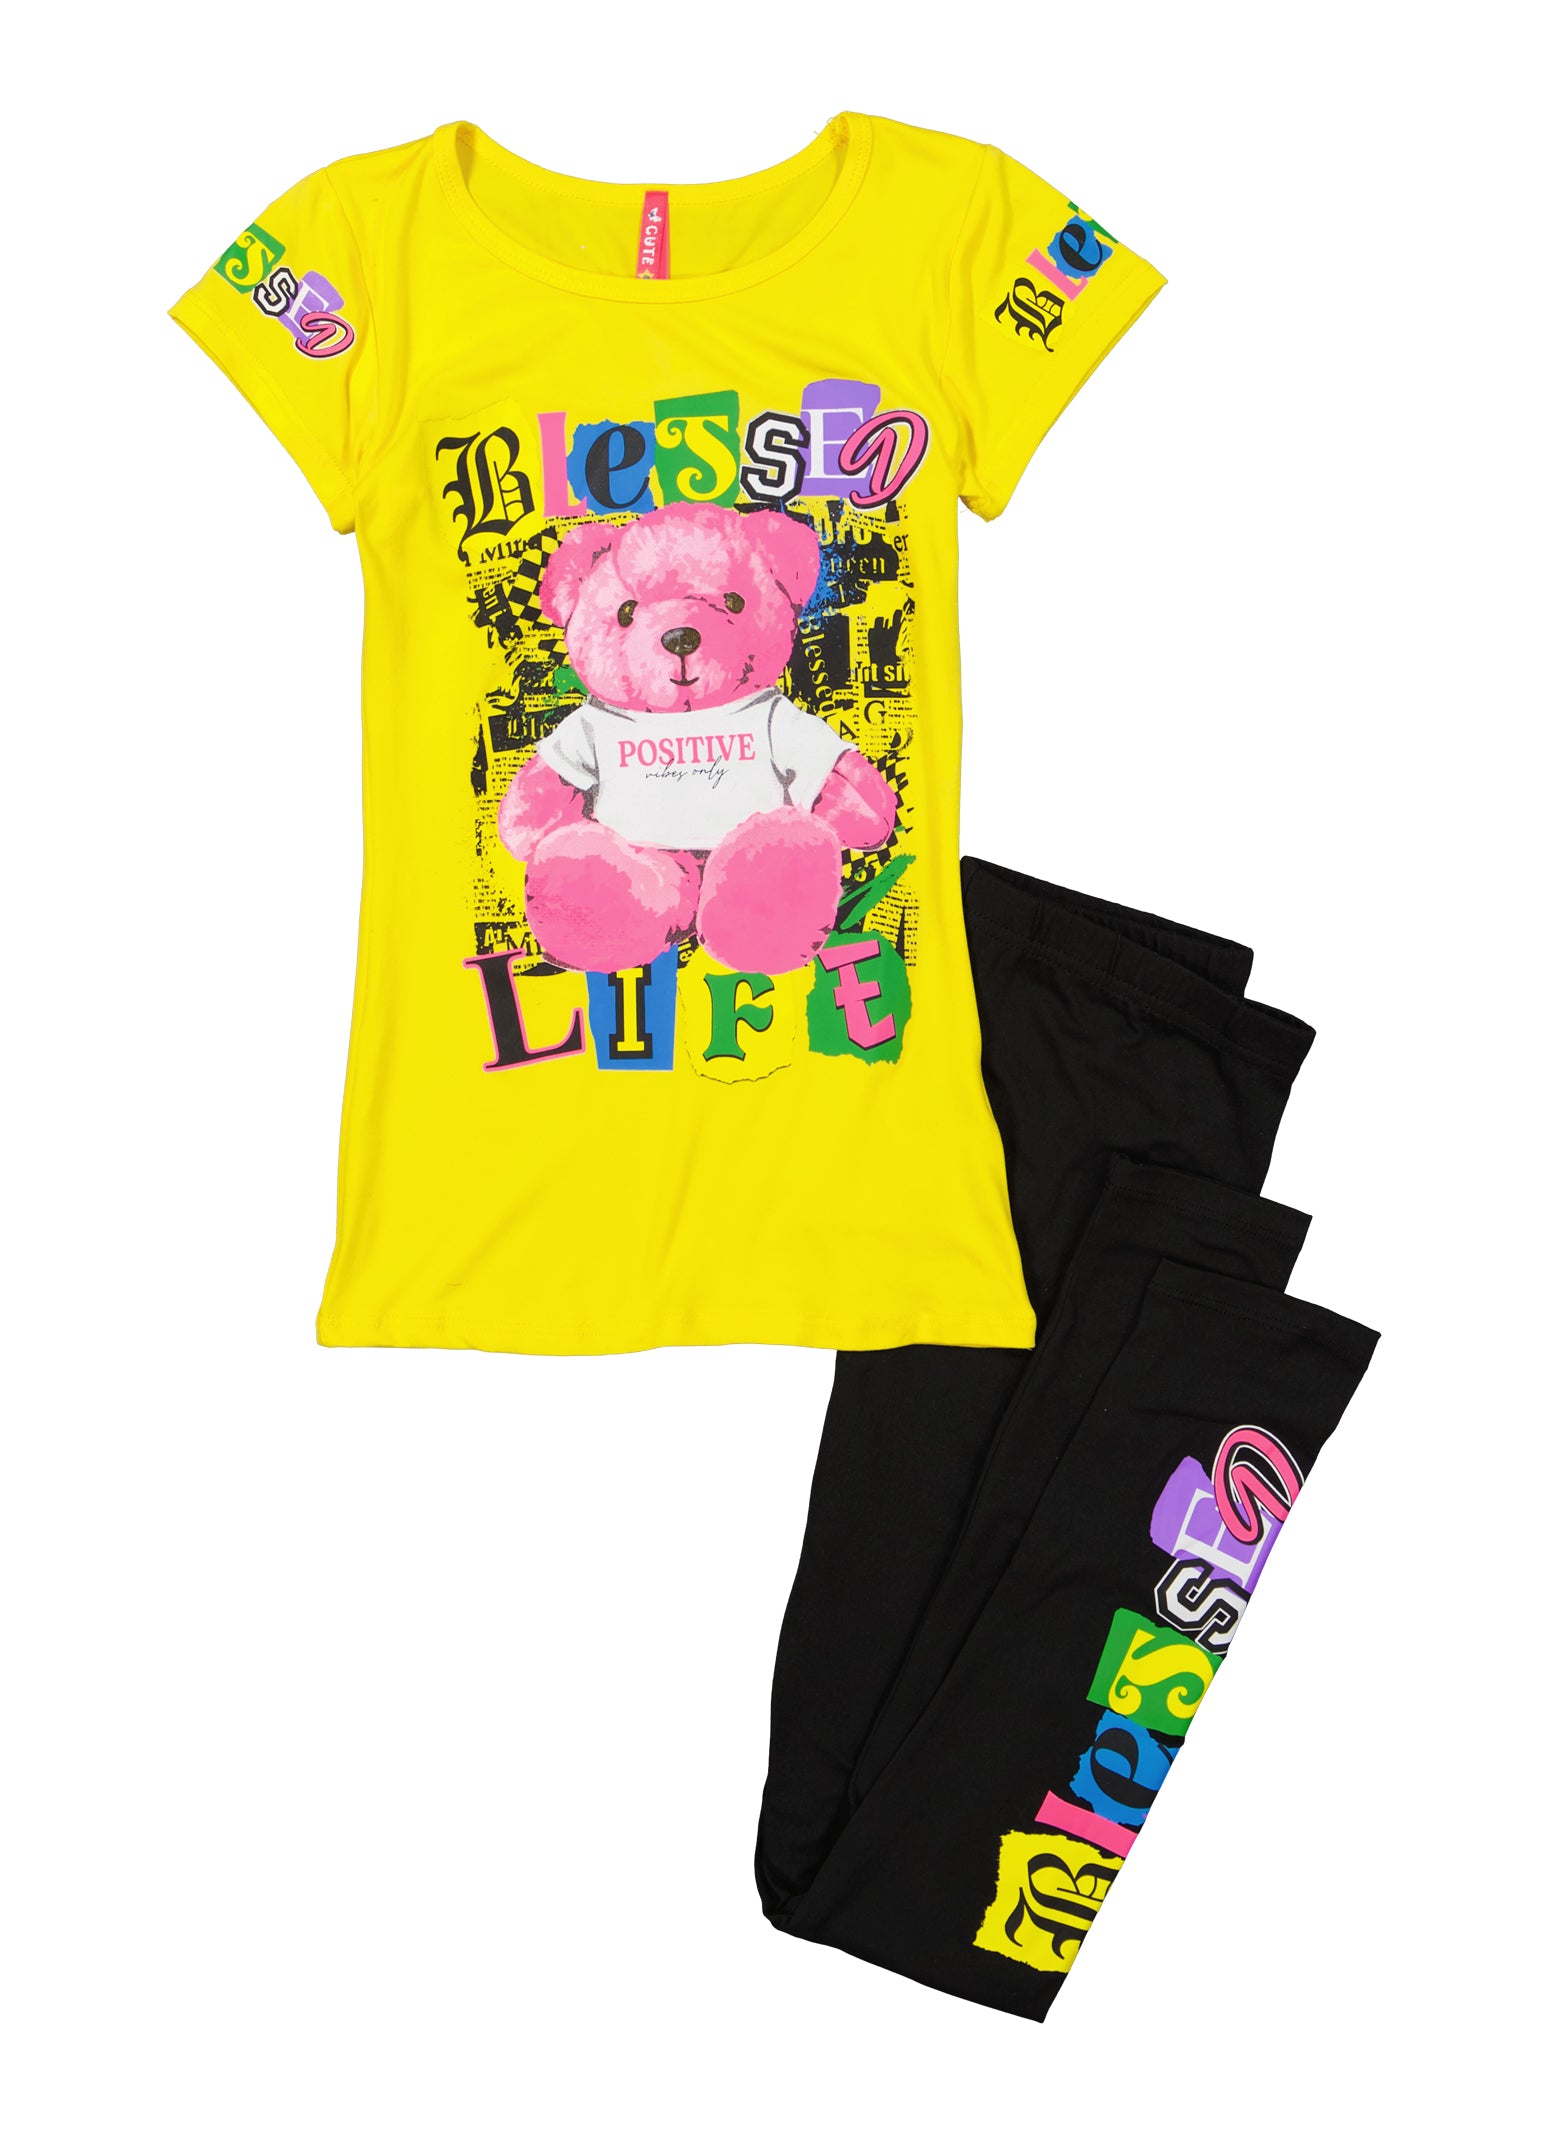 Girls Blessed Life Bear Graphic Tee and Leggings, Yellow, Size 14-16